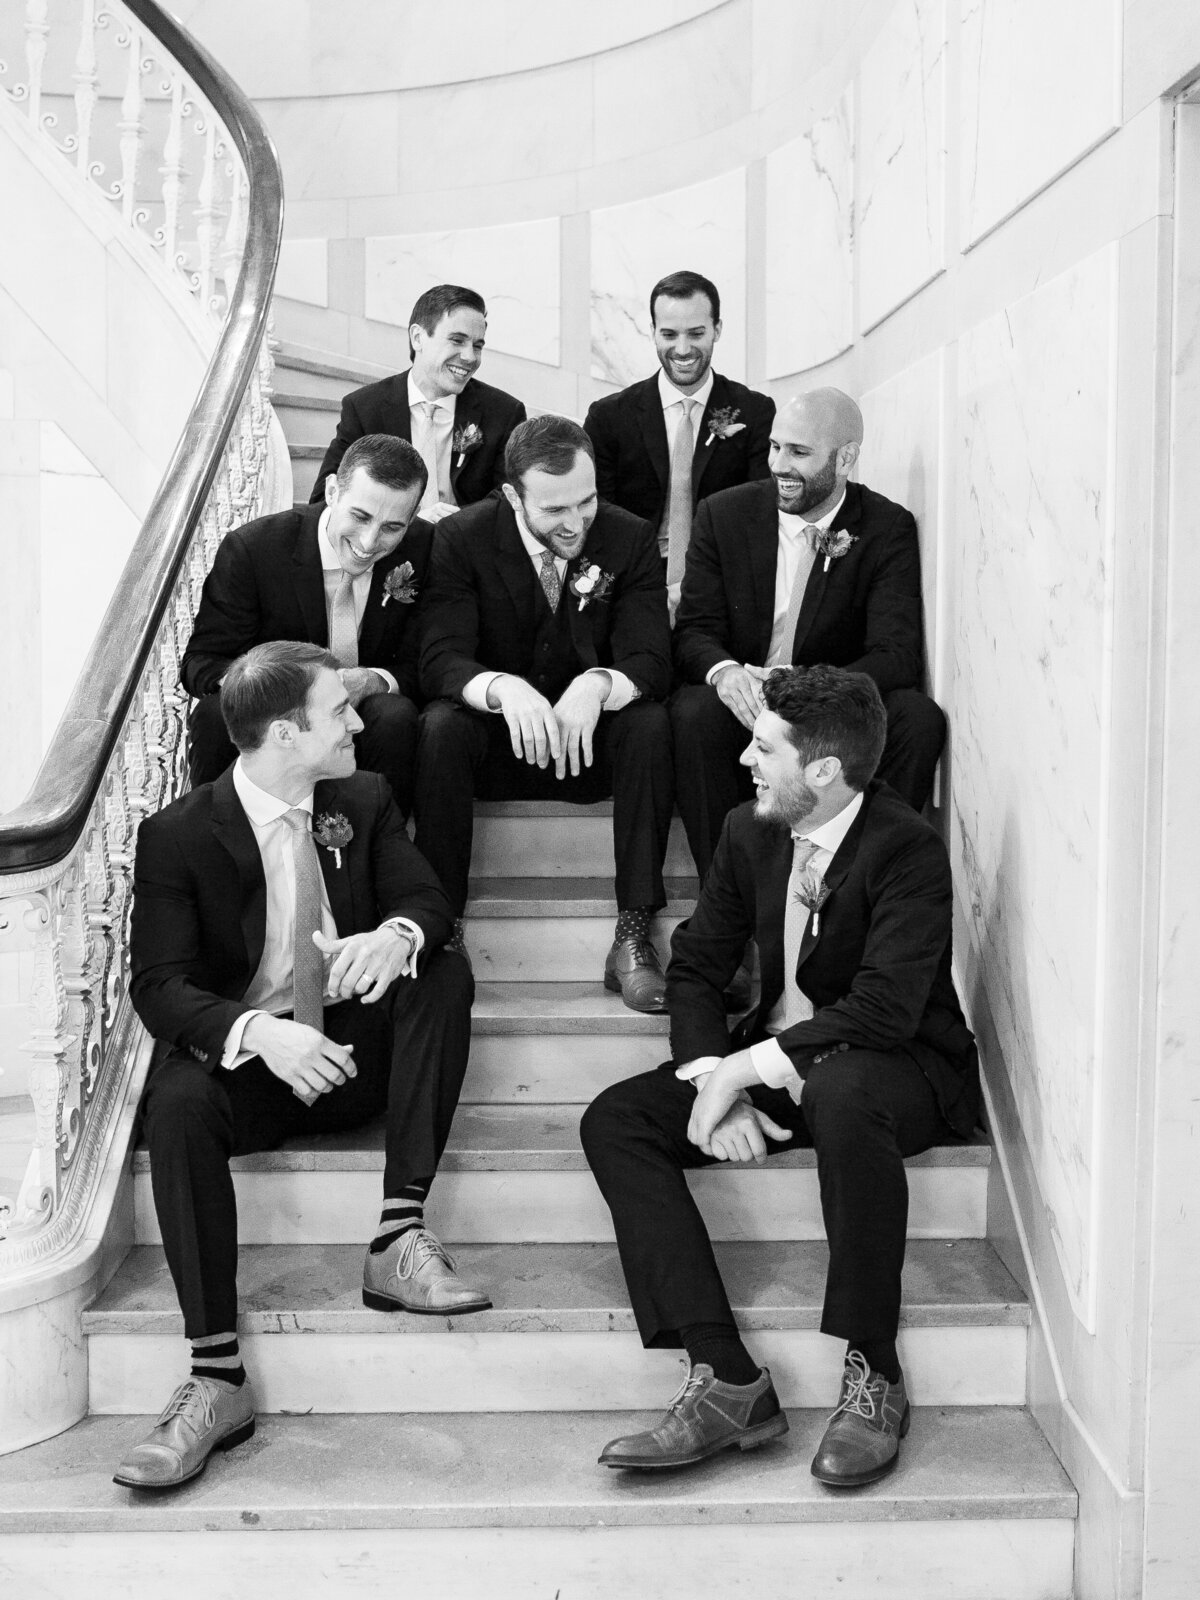 The groom laughs with the groomsmen in a stairwell.